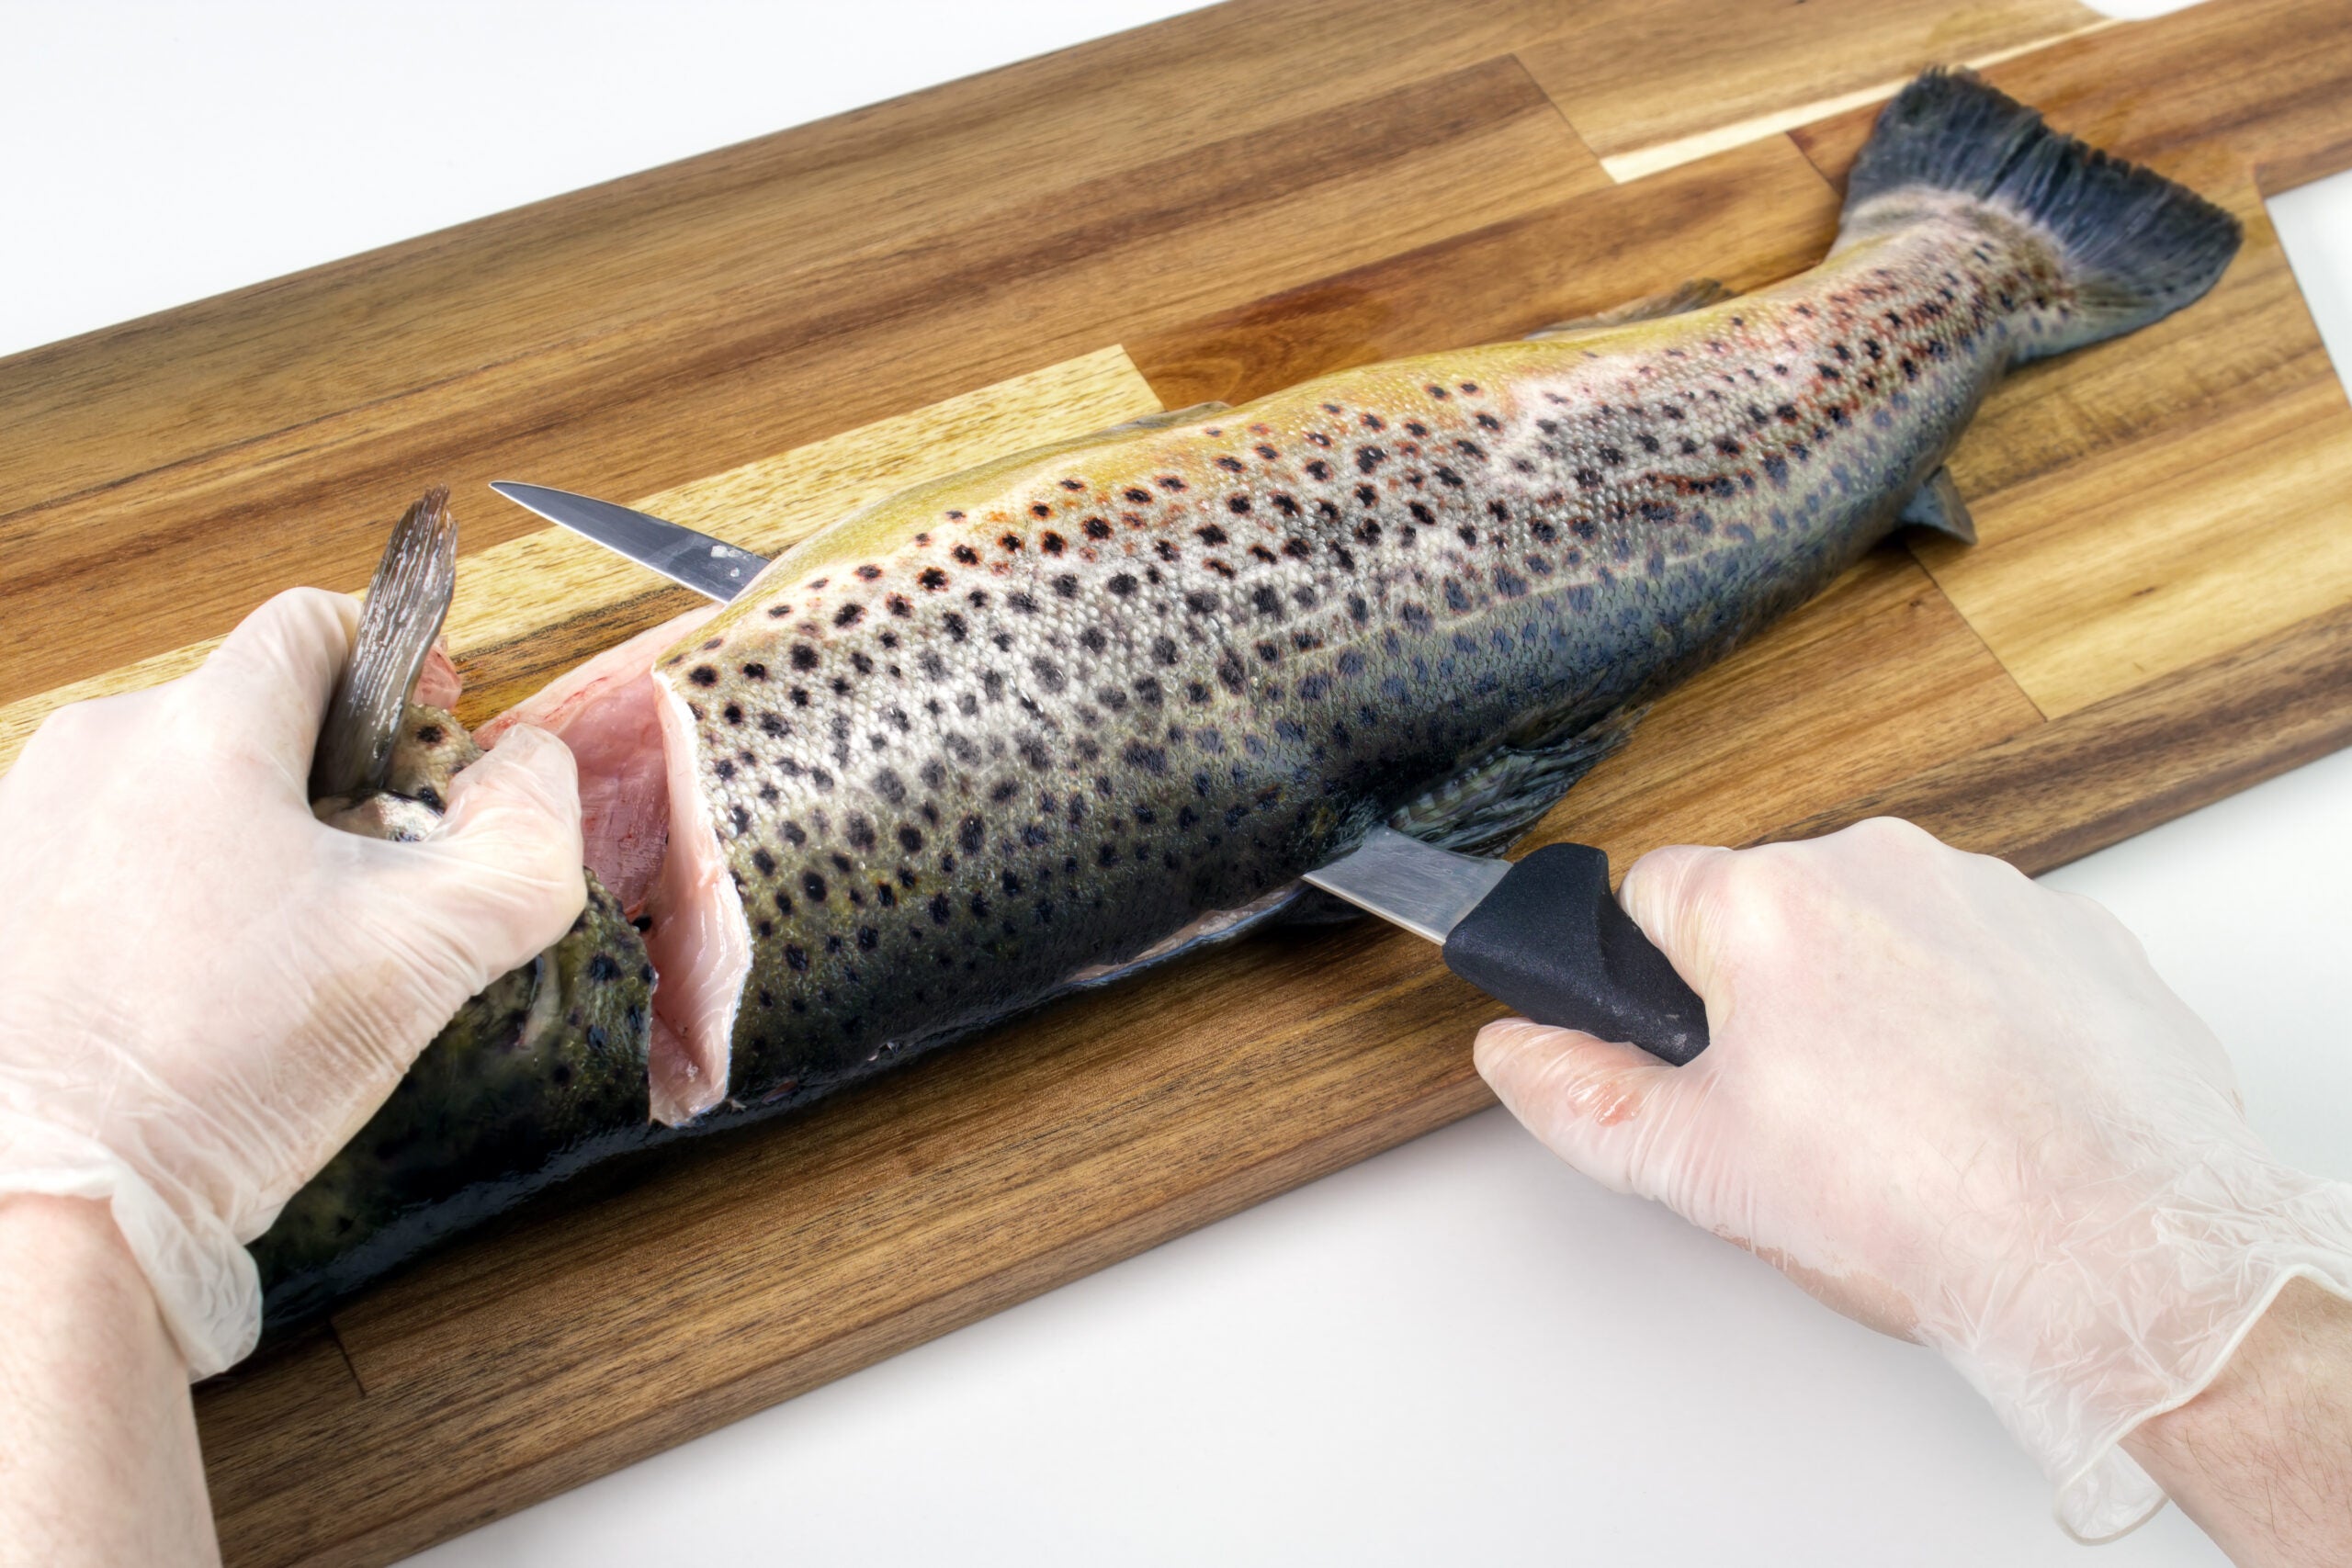 photo of how to clean a trout by filleting